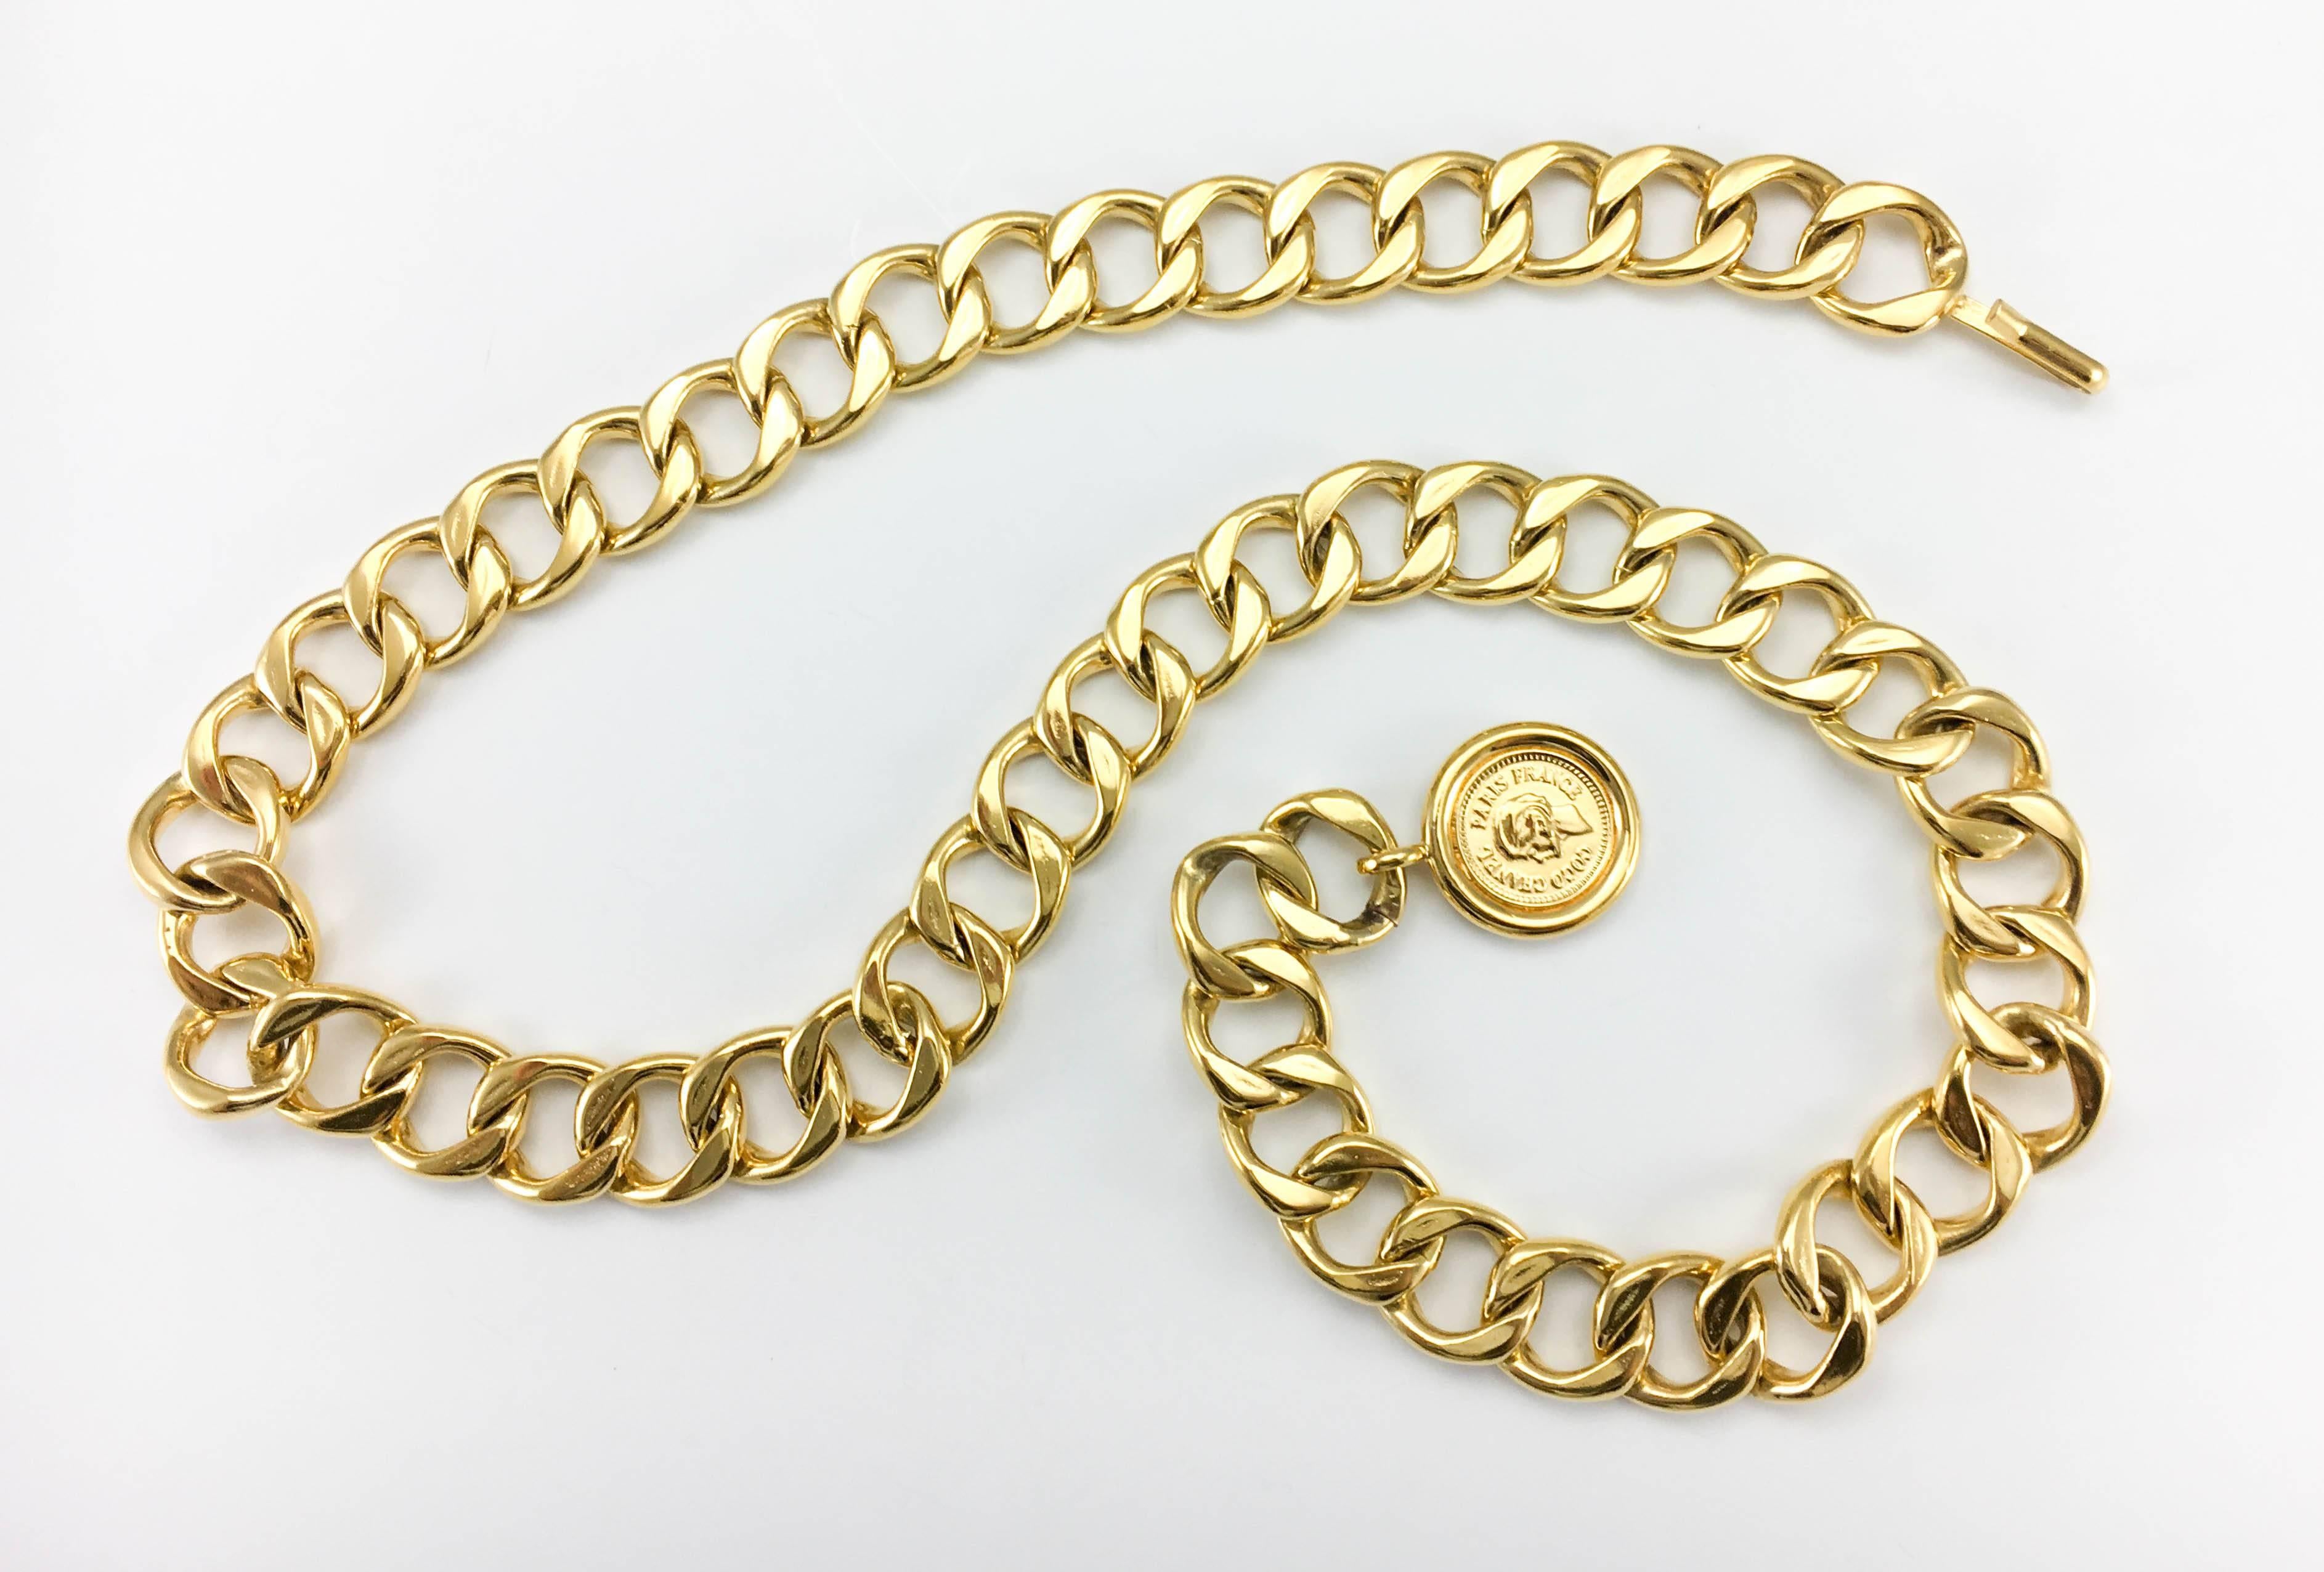 Beautiful Vintage Chanel Gold-Tone Medallion Chain Belt / Necklace. This fabulous piece by Chanel was created in the 1980’s. It is composed of a chunky chain and a medallion hanging at the end bearing the profile of Coco Chanel on one side and the